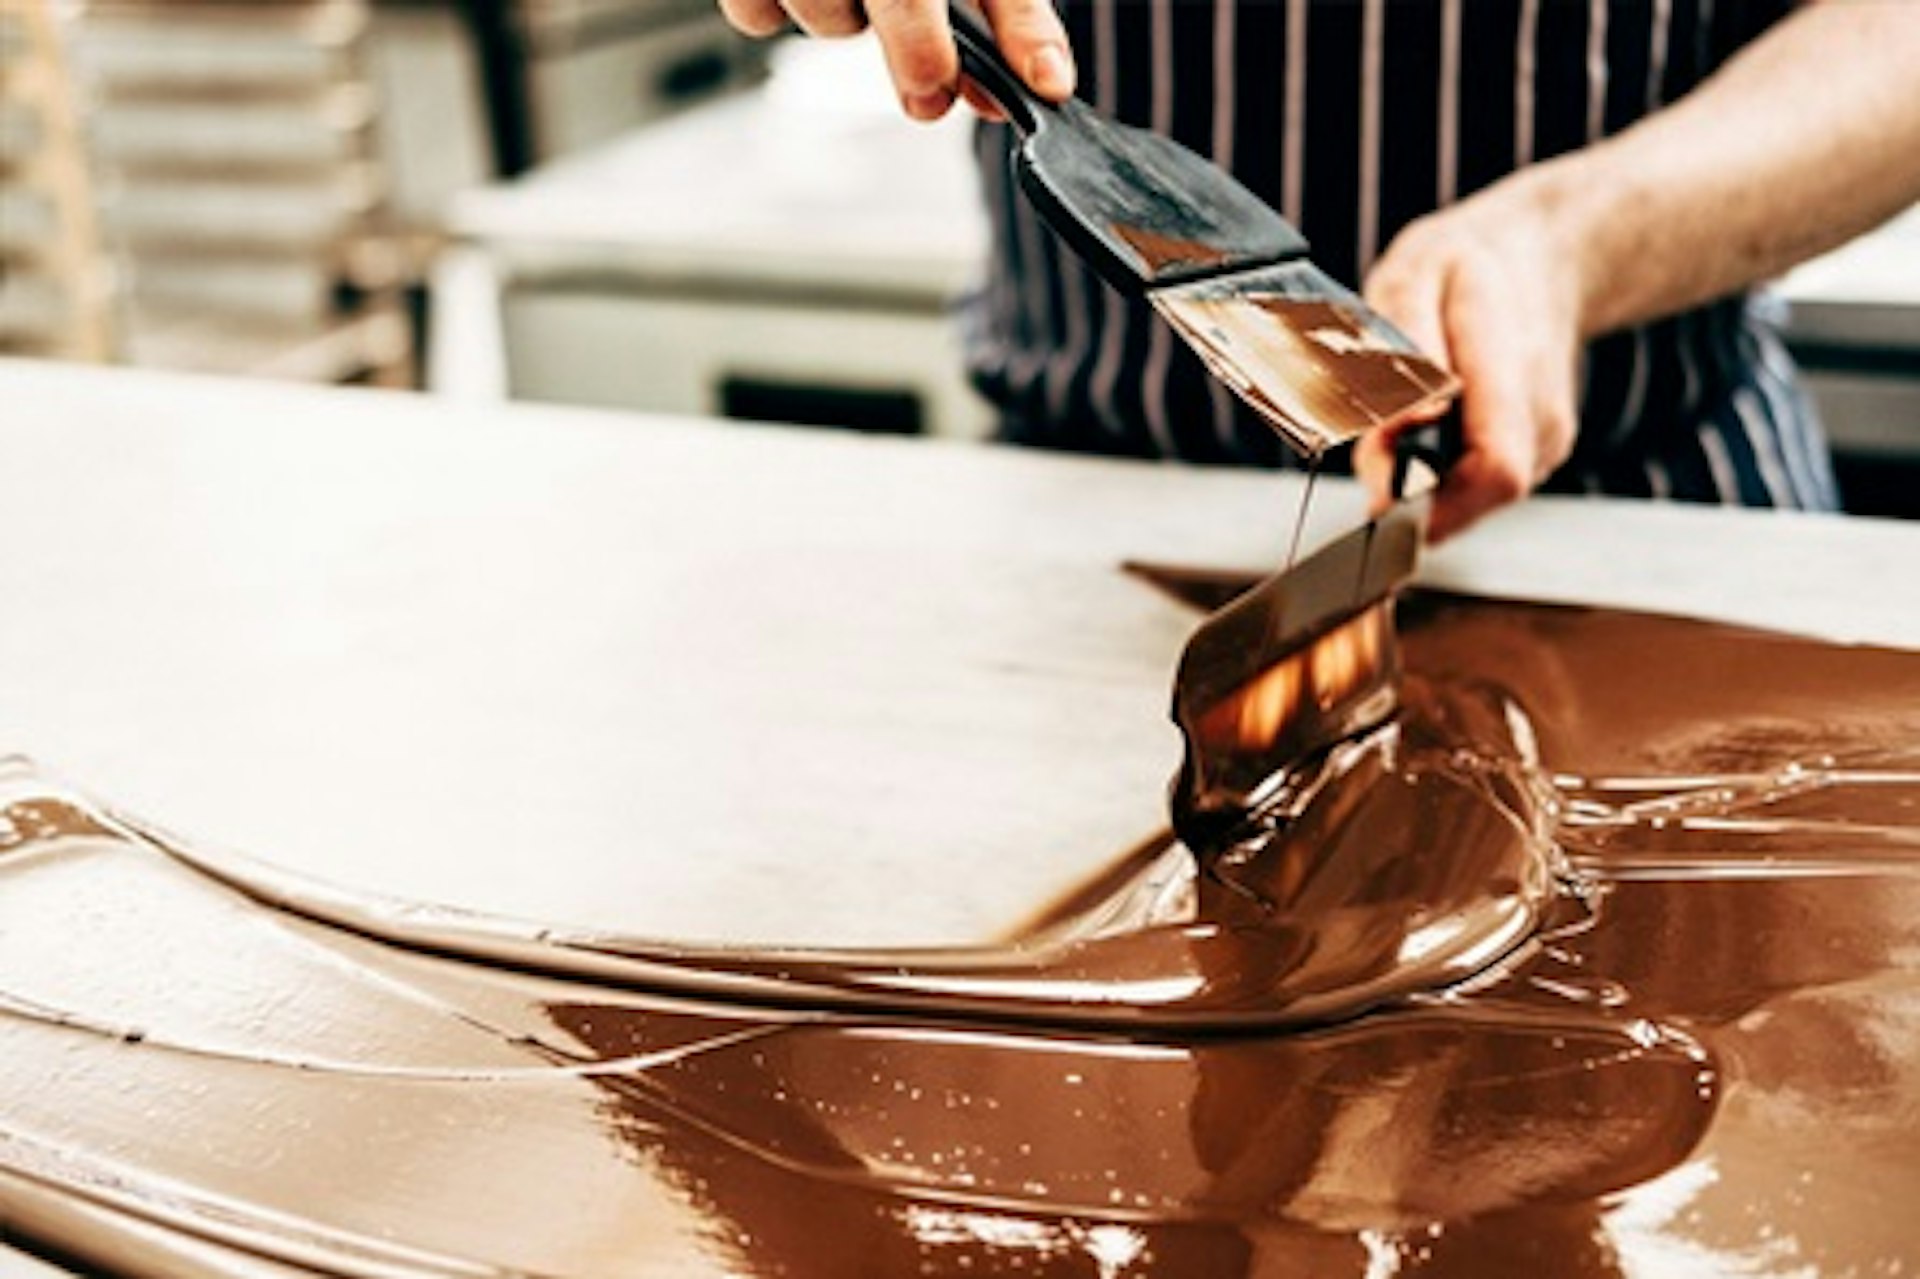 Sea Salt Chocolate Praline Making Class for Two with Melt Notting Hill, London 3